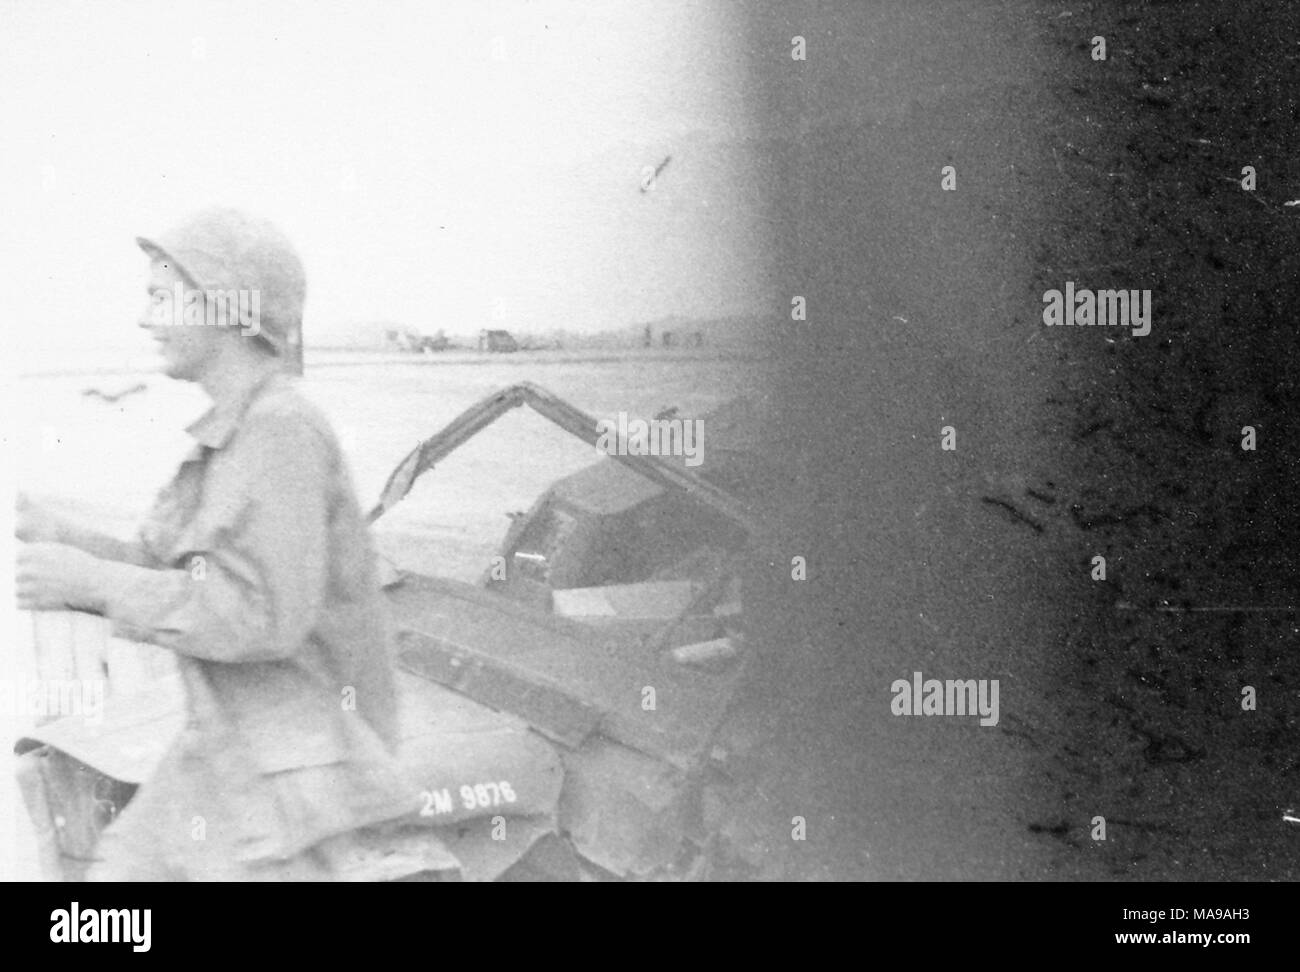 Black and white photograph, partially obscured, showing a soldier, in three-quarter profile, wearing a helmet and fatigues, walking past the hood of a military vehicle, photographed in Vietnam during the Vietnam War (1955-1975), 1971. () Stock Photo